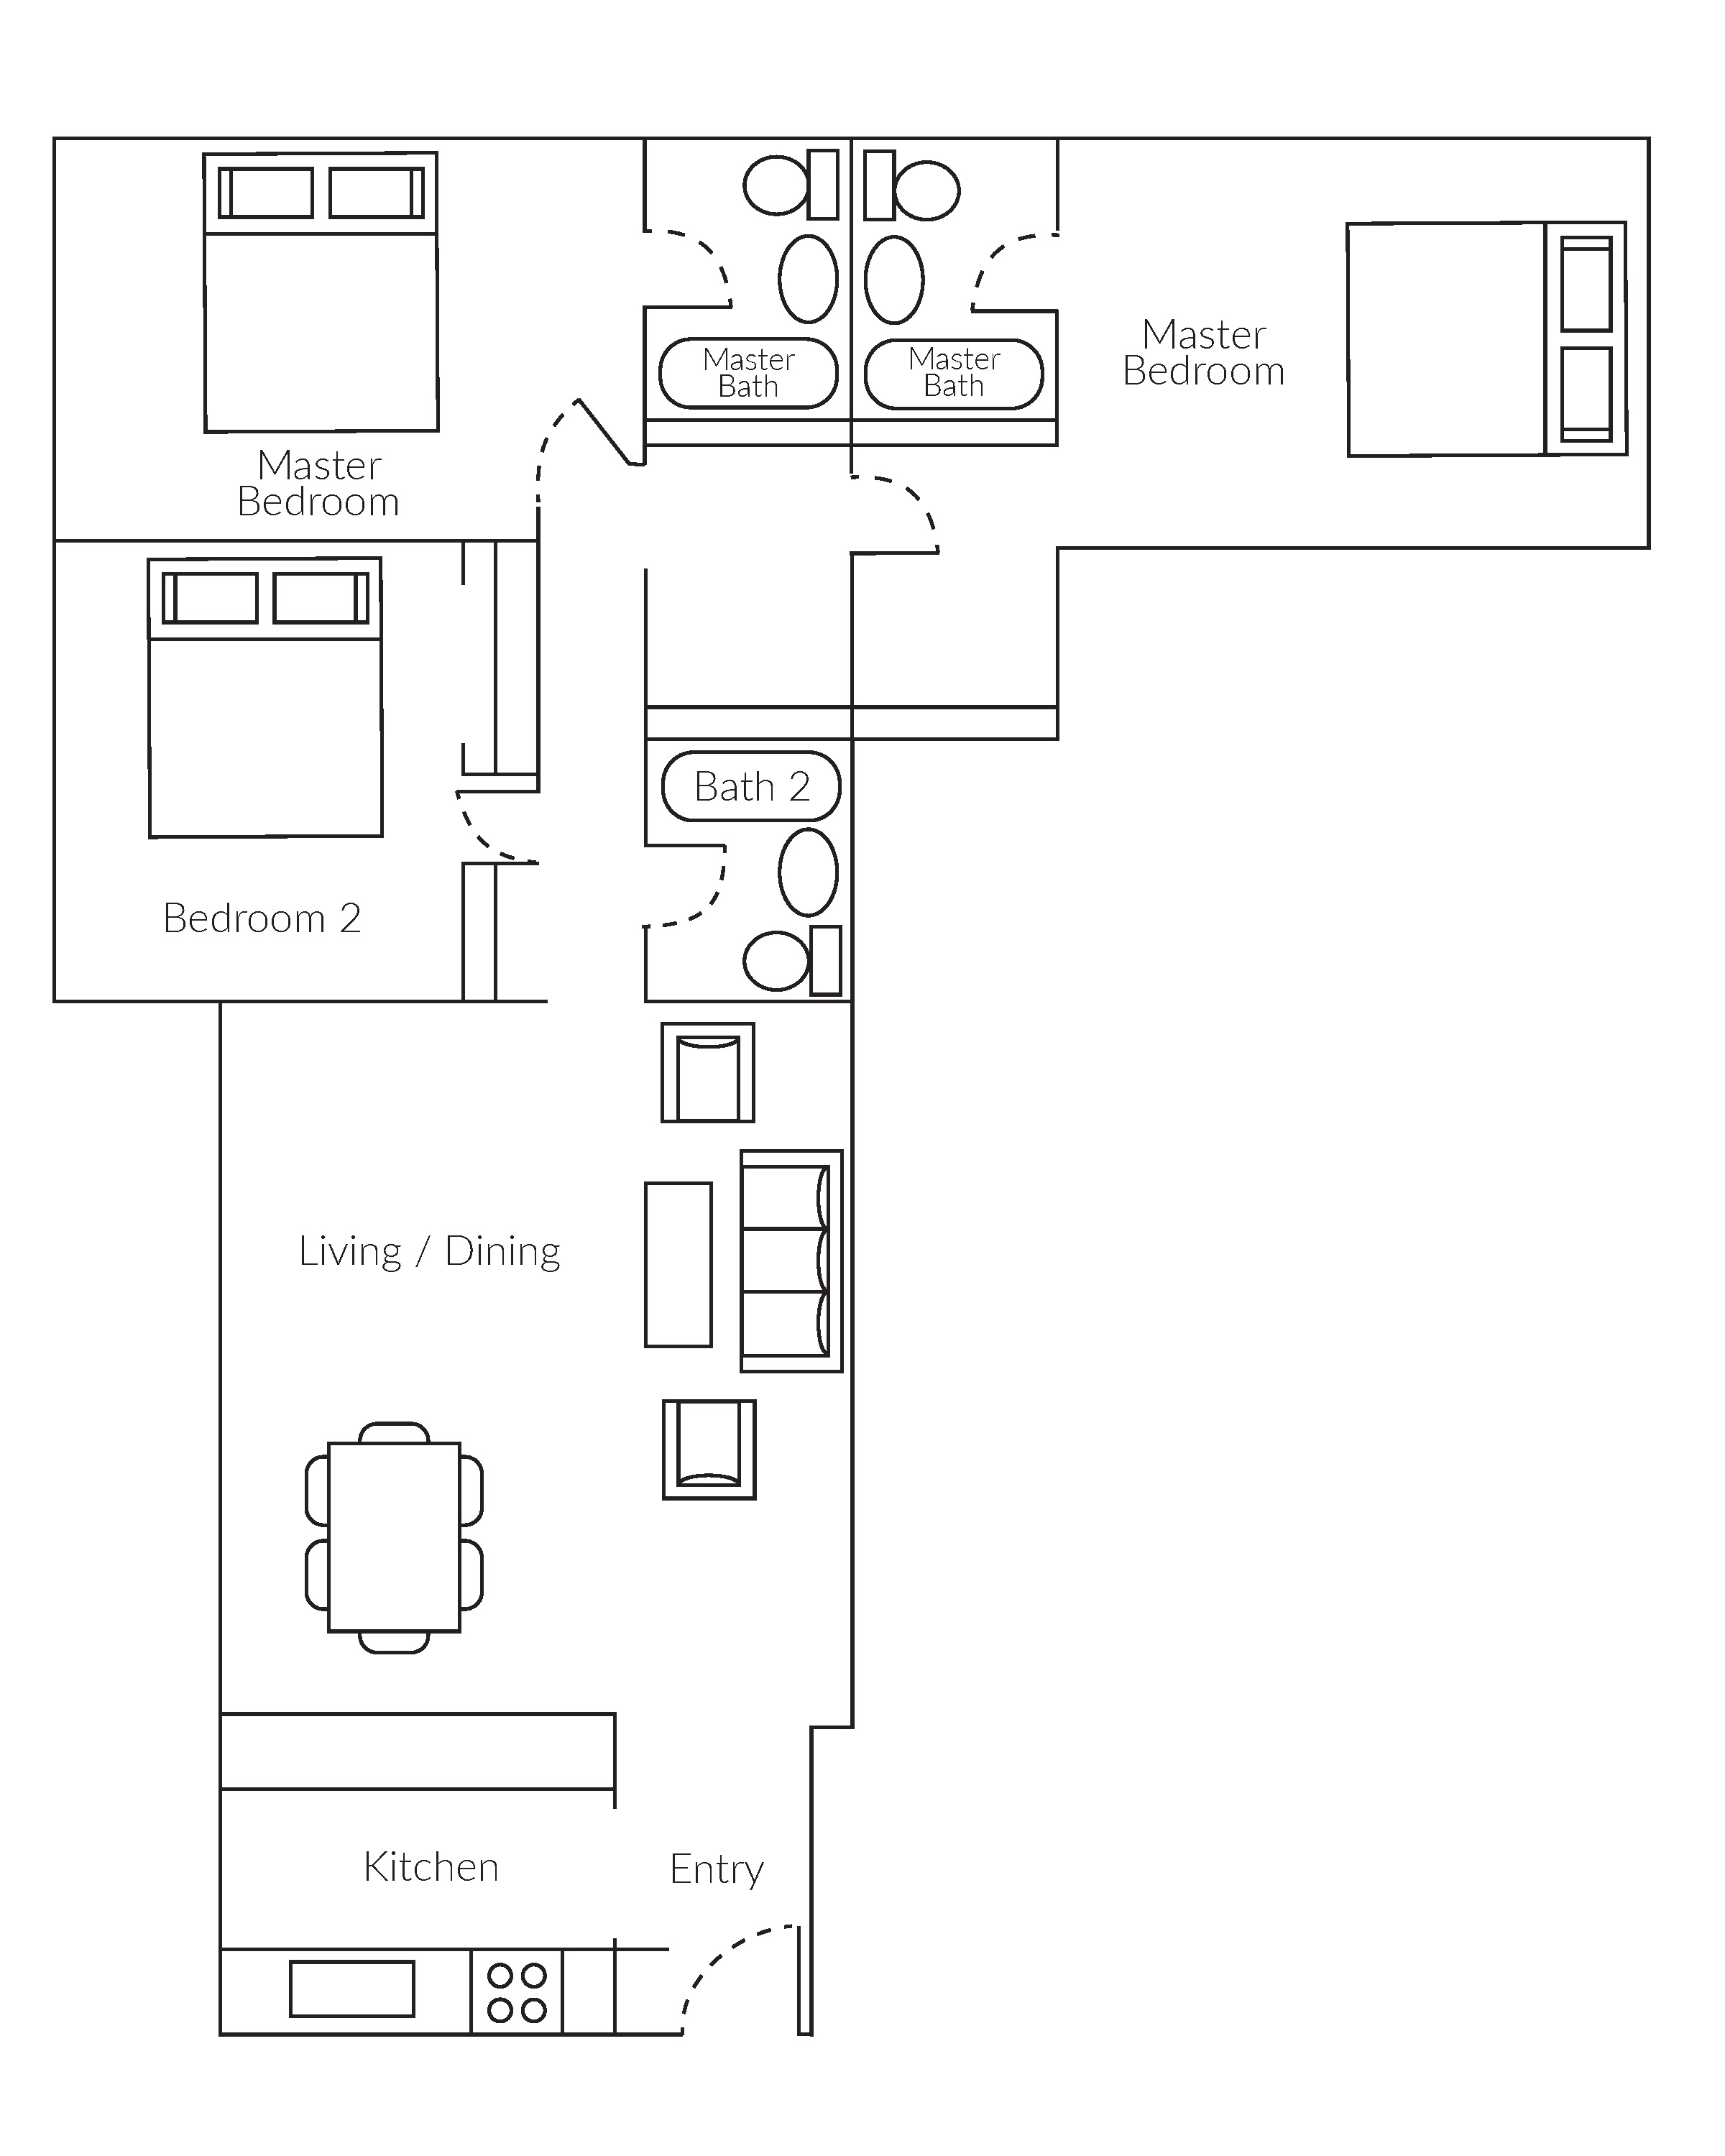 3 Bedroom Apartment Floor Plan With Dimensions Search